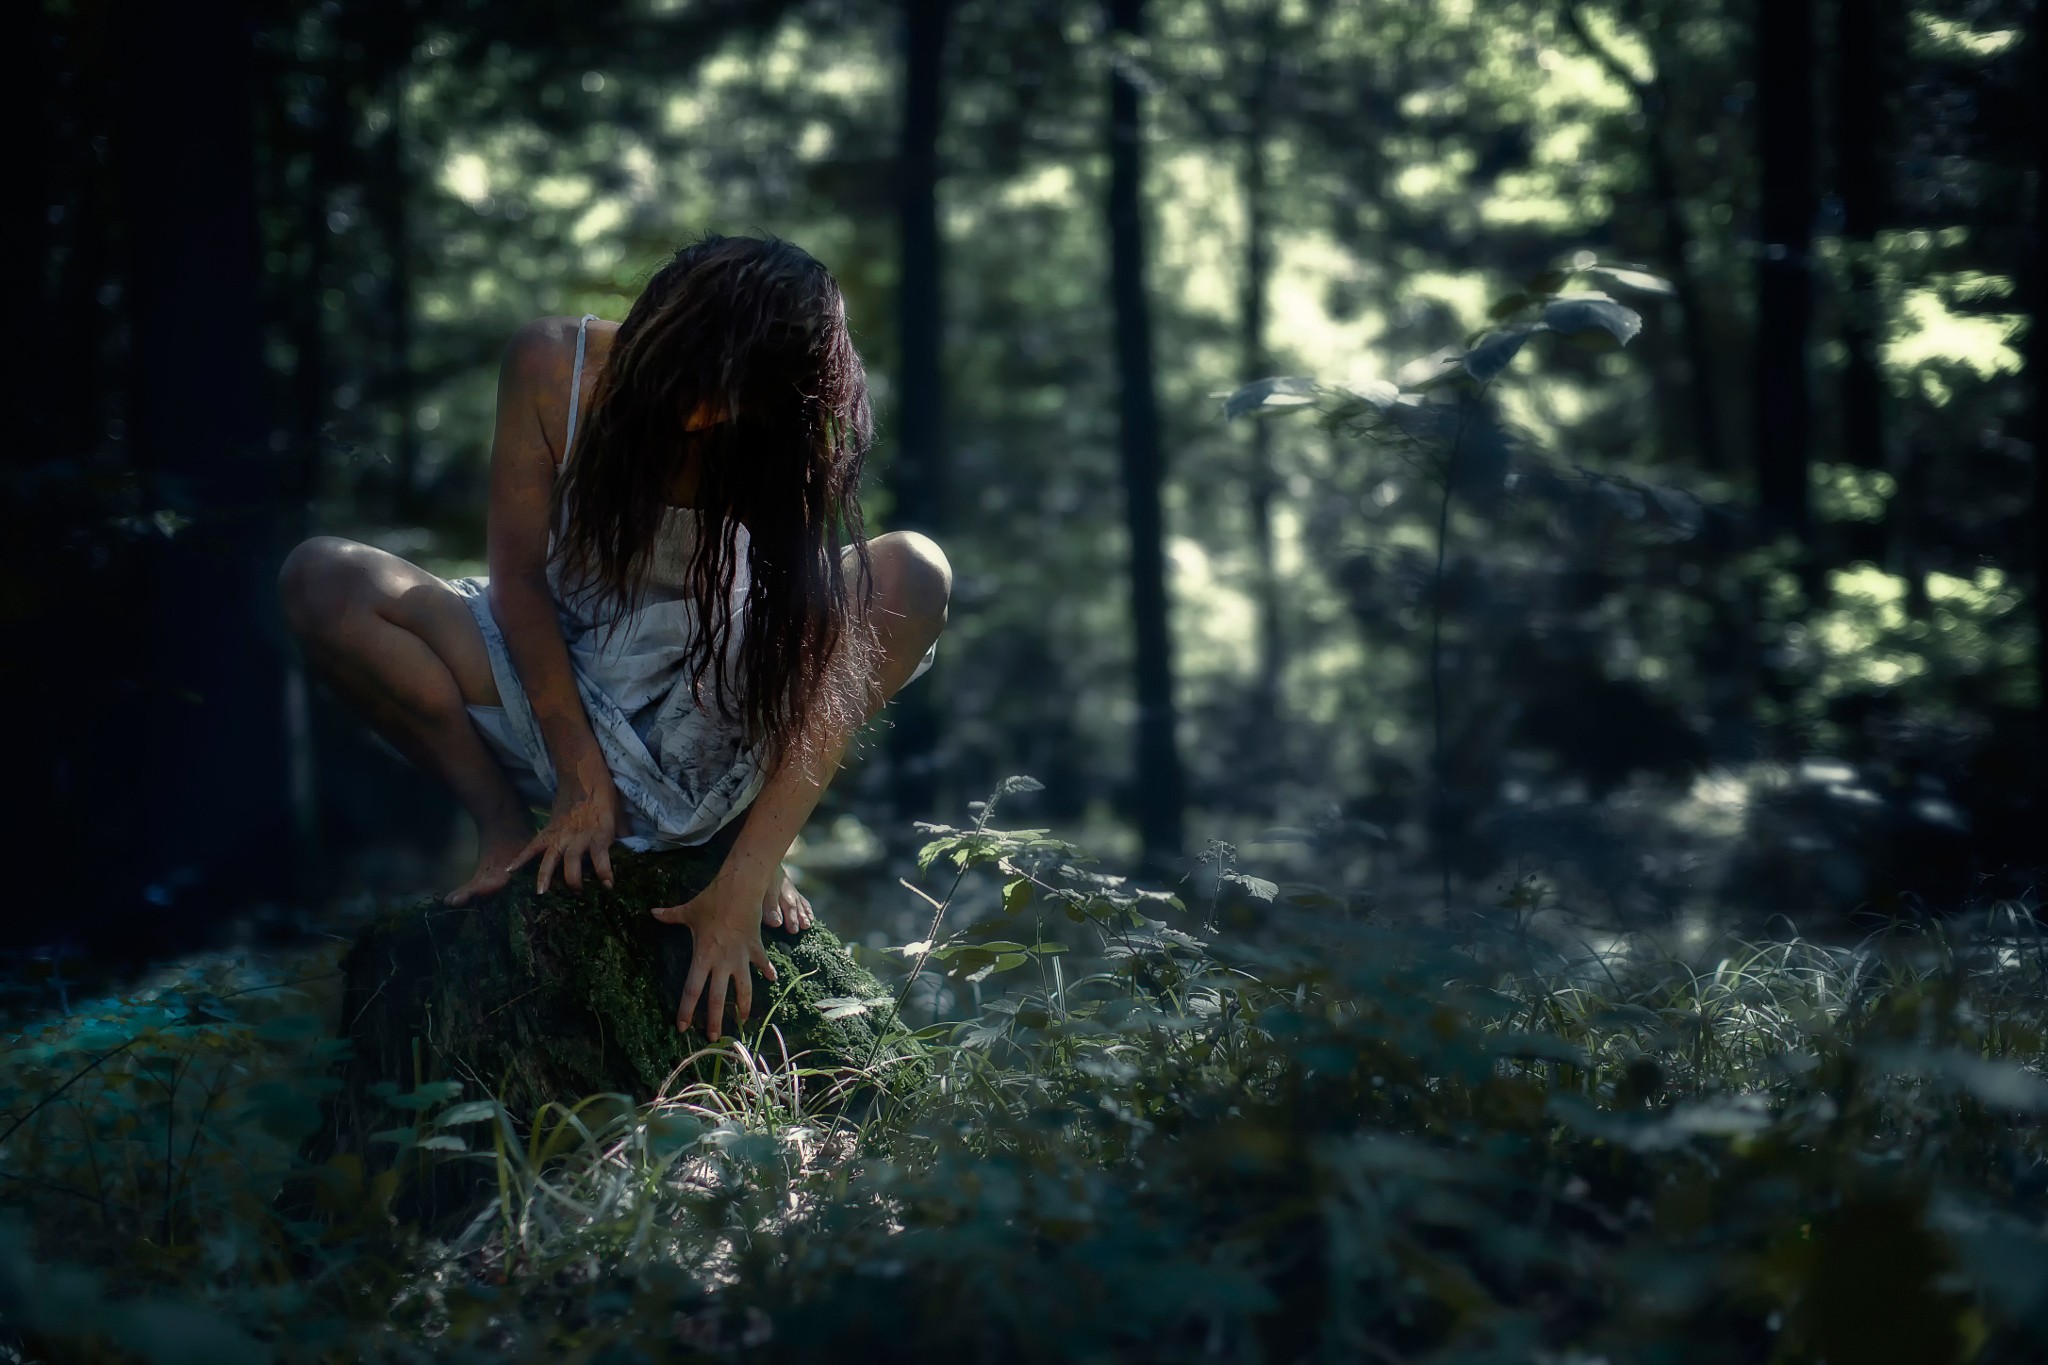 People 2048x1365 women nature spooky long hair women outdoors forest squatting hair in face plants model